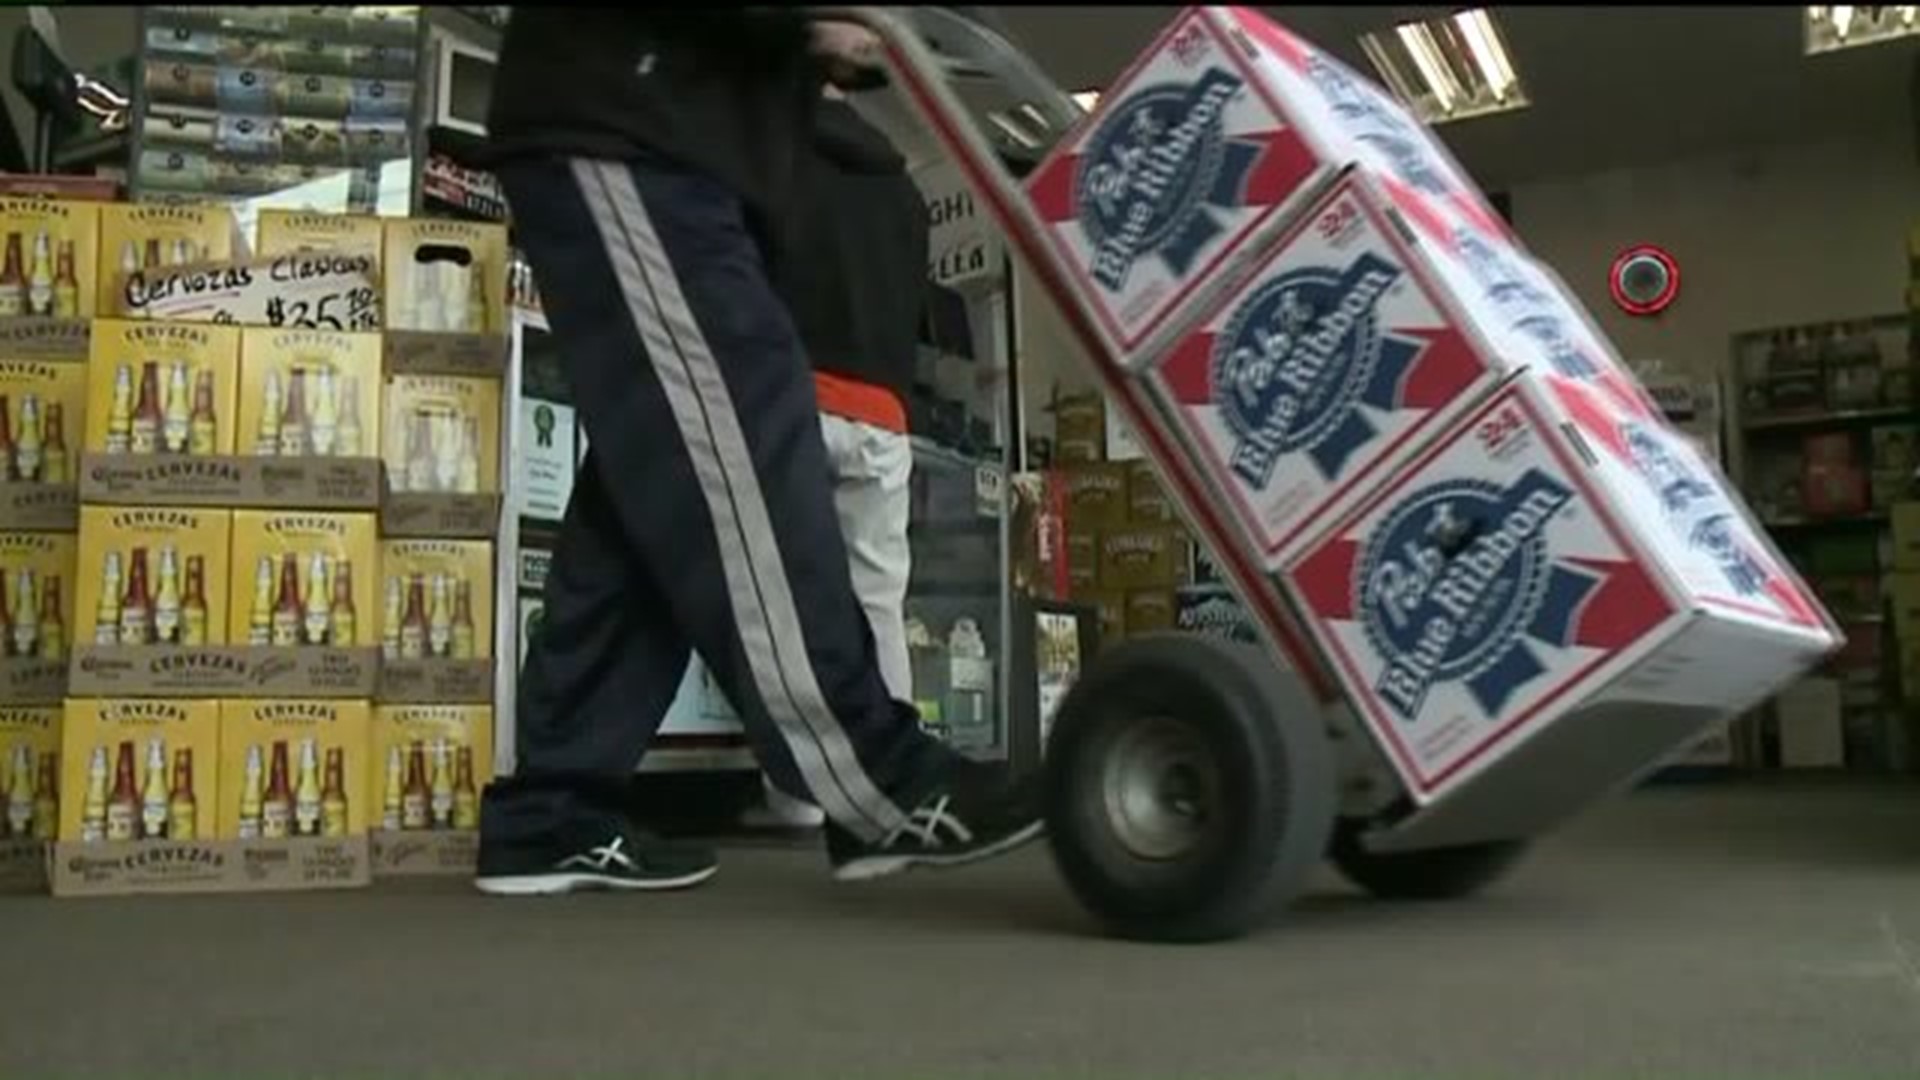 Stocking Up on Beer Before the Winter Storm